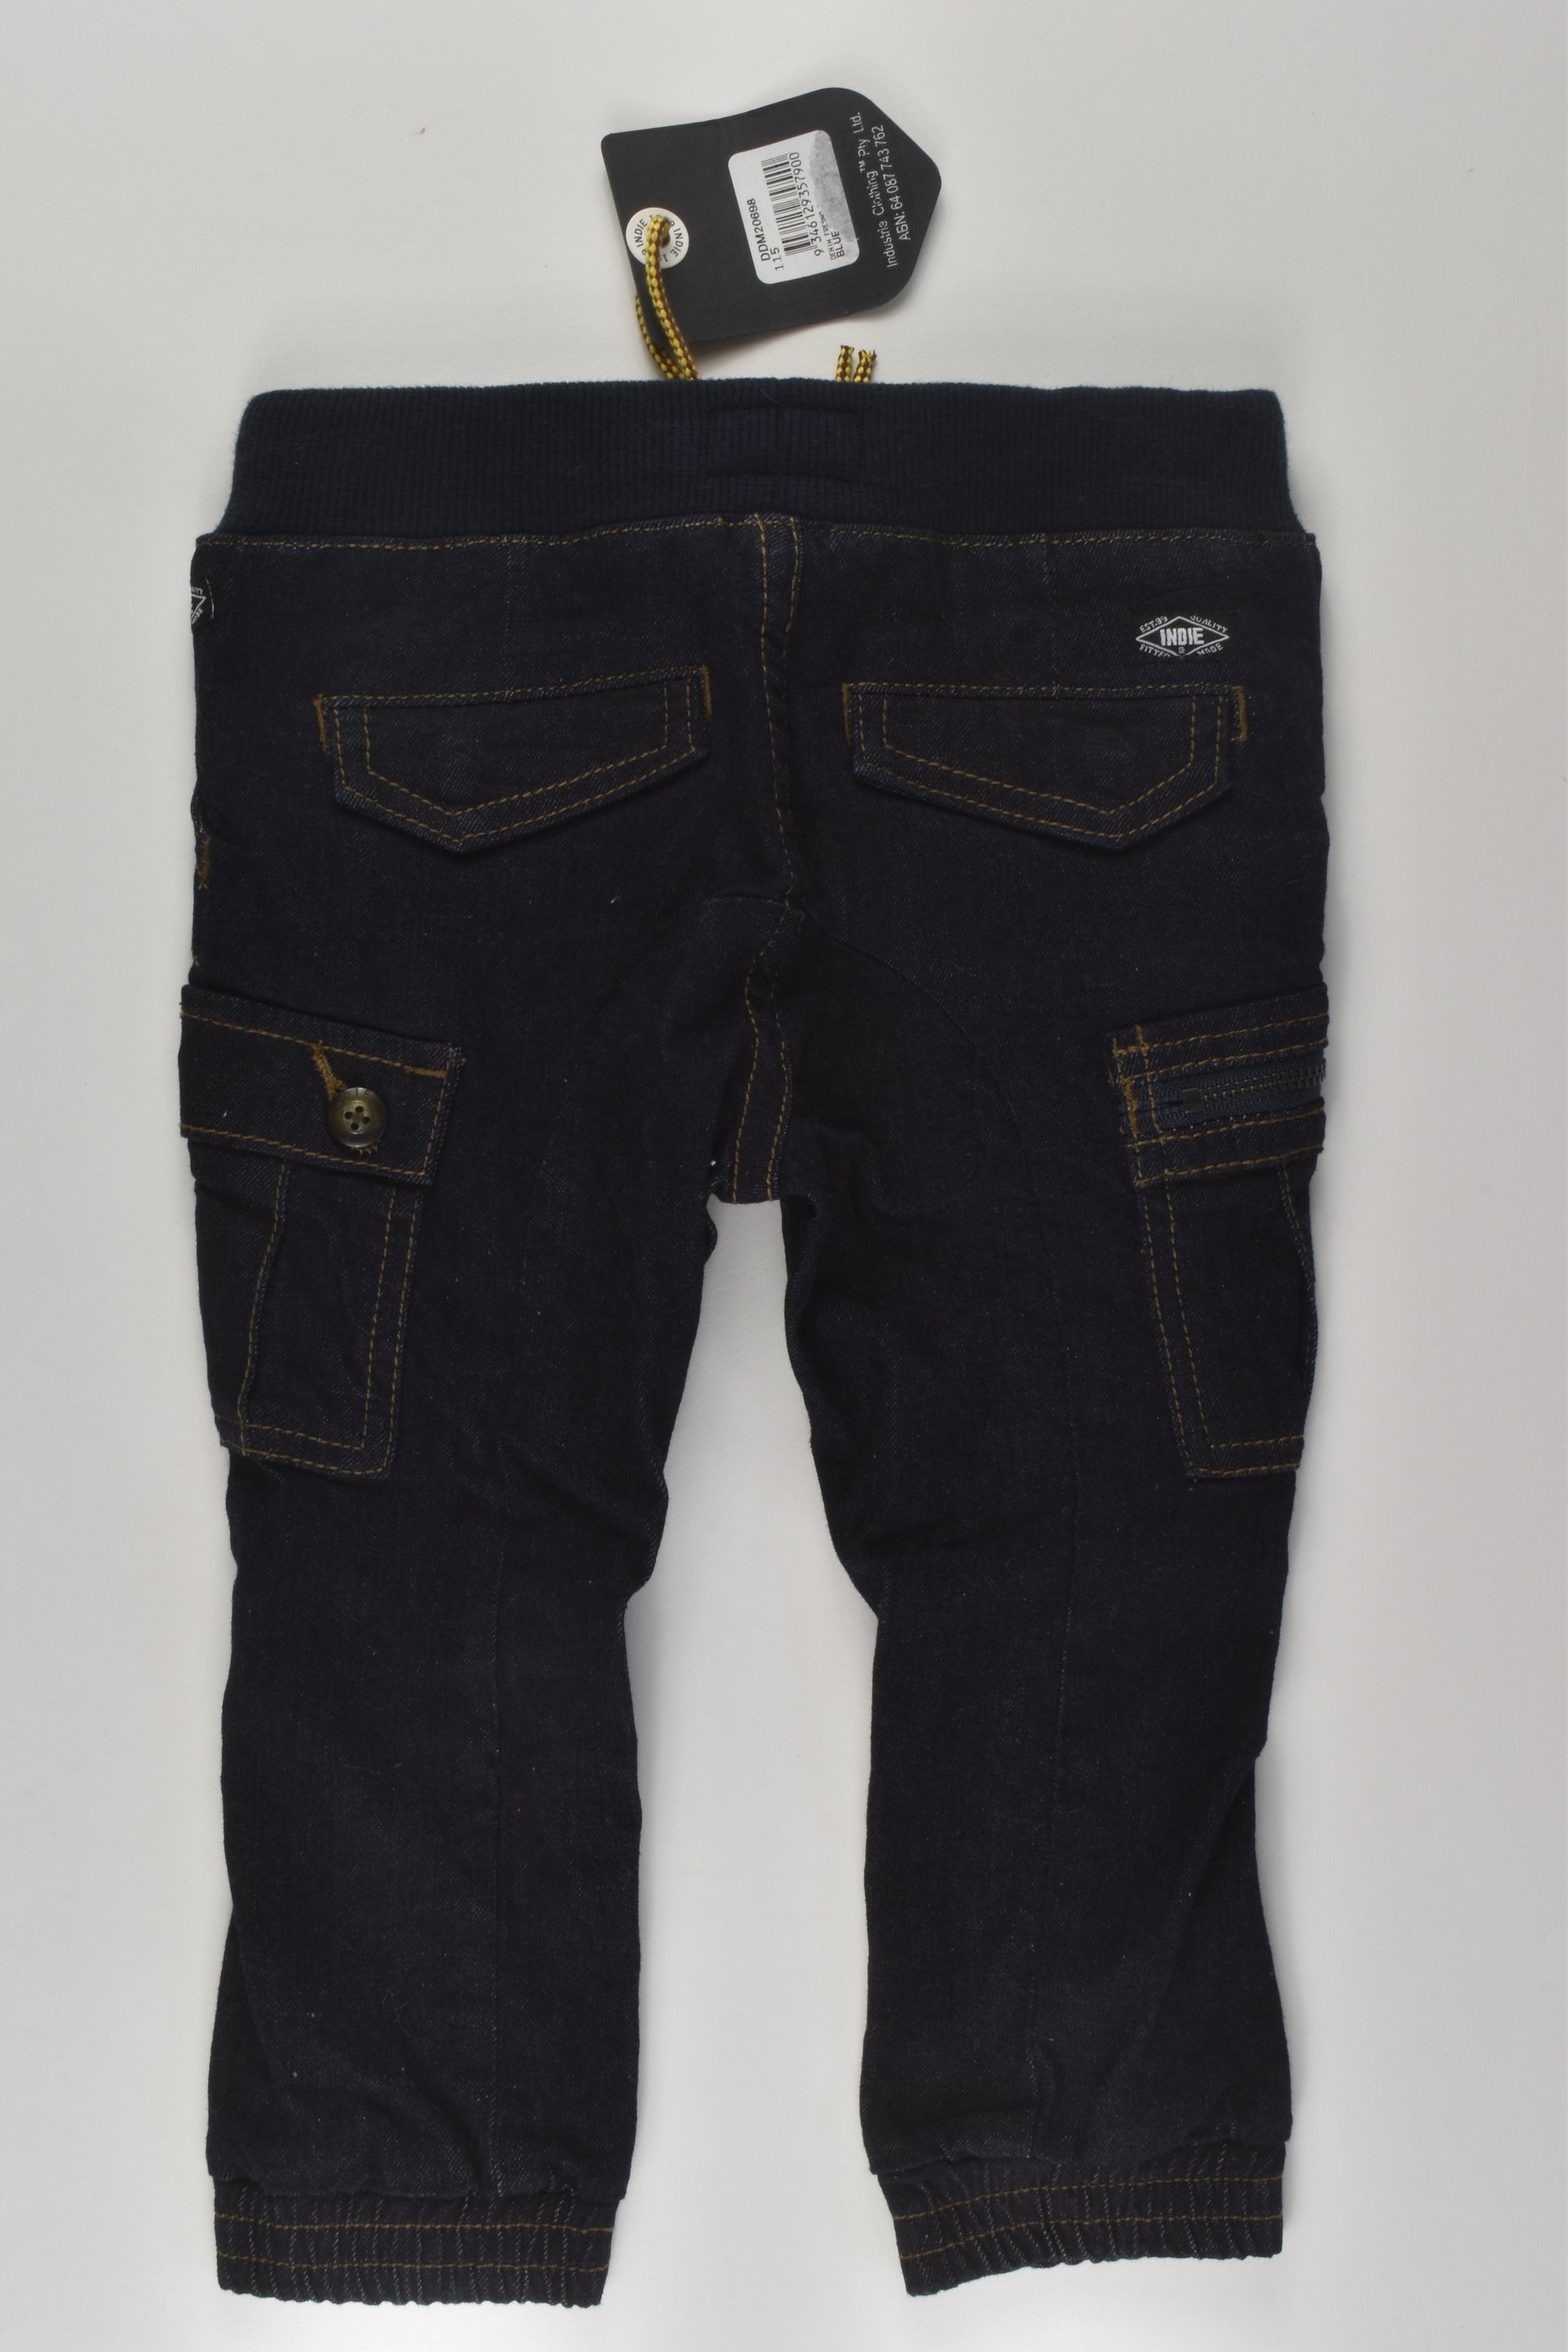 NEW ABCD by Indie Size 0 Denim Pants